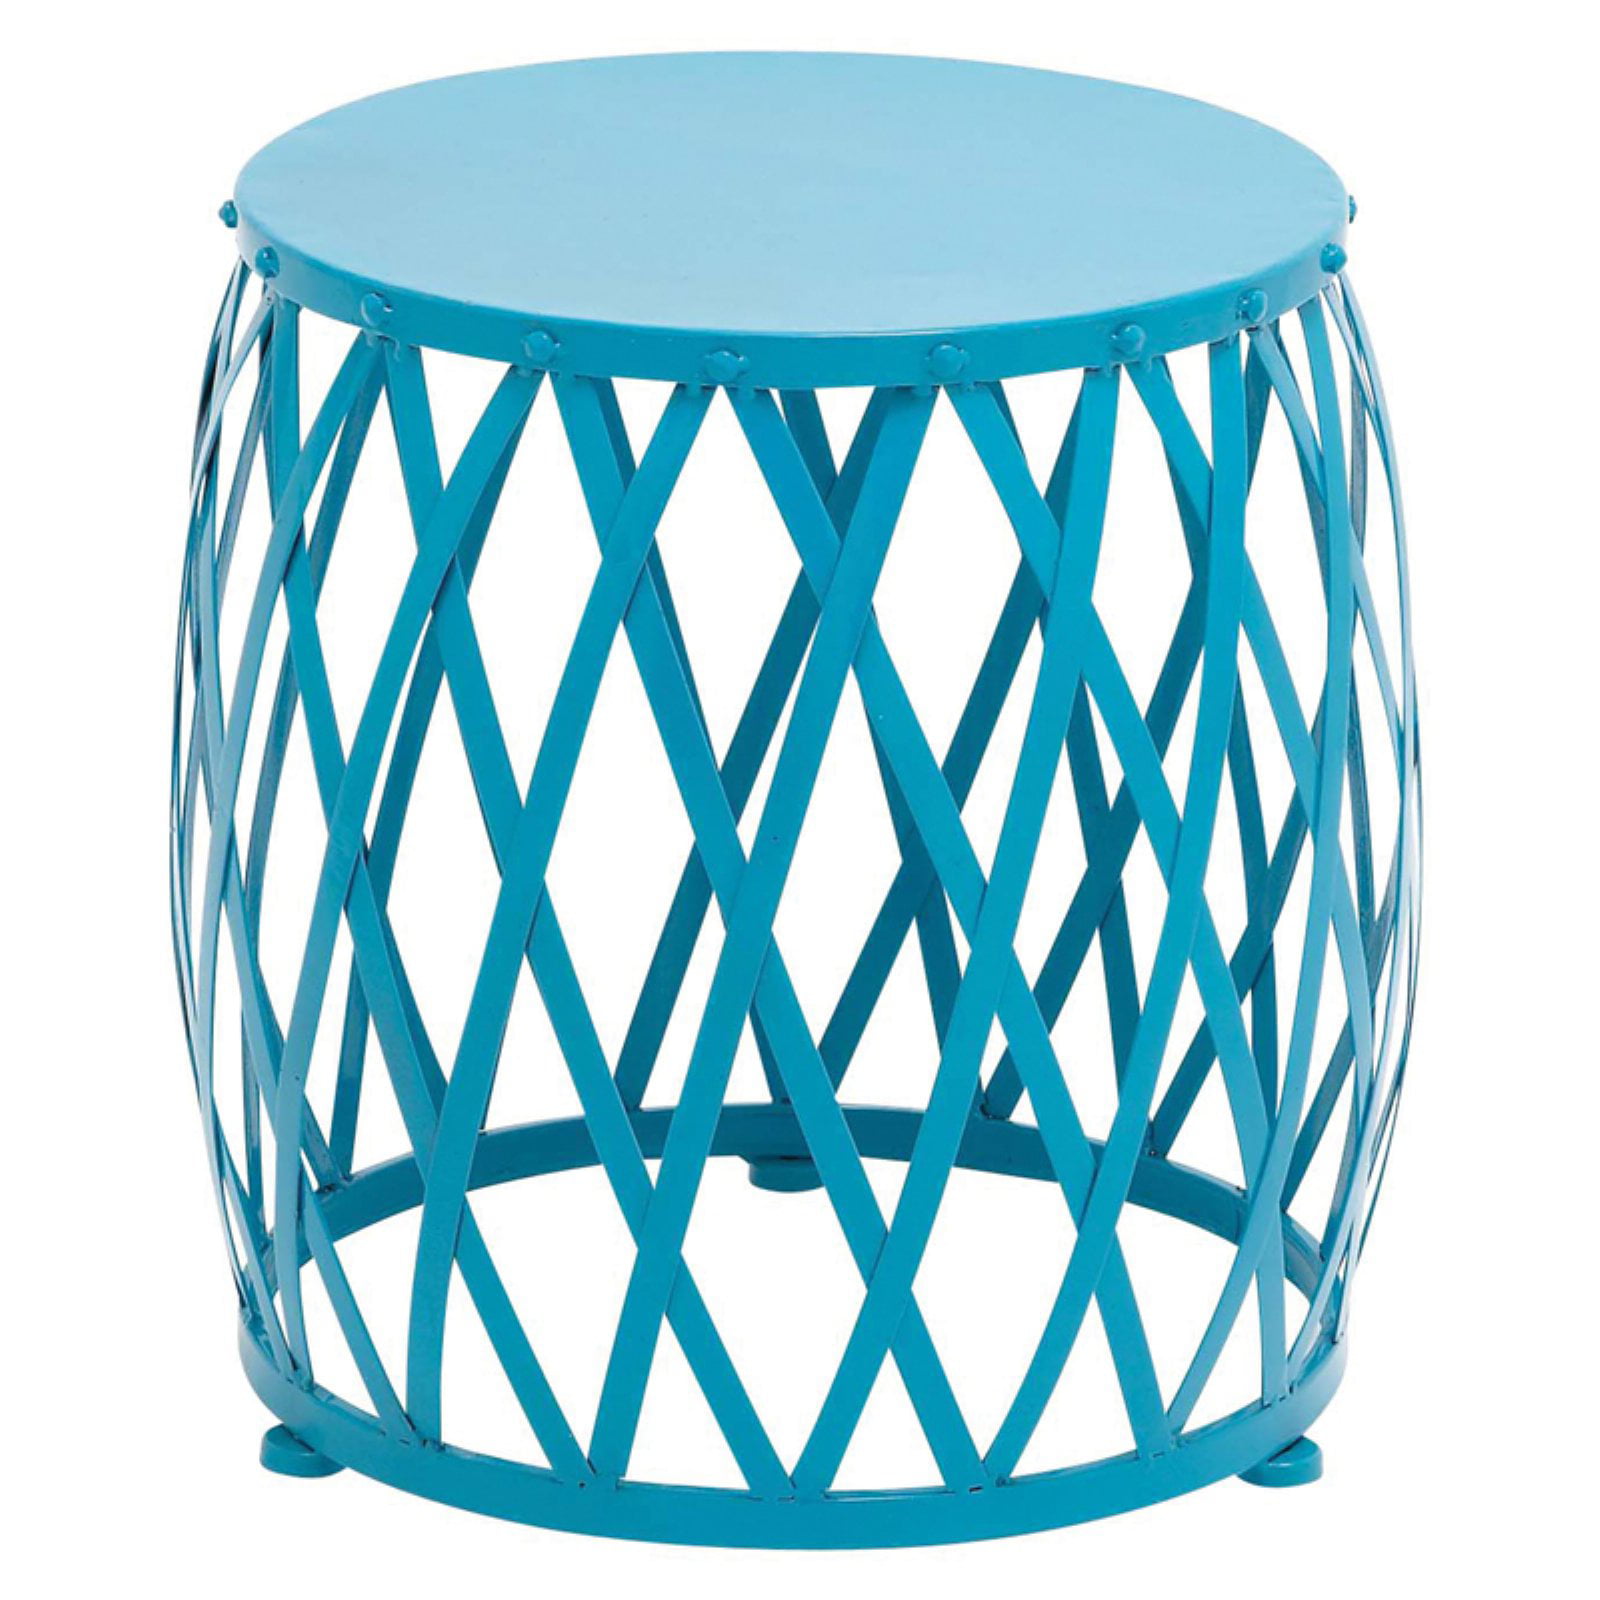 Benzara 96978 Attractive Styled Metal Accent Table 19.2 x 19.2 x 19.2 Blue Benzara Woodland Imports DROPSHIP 